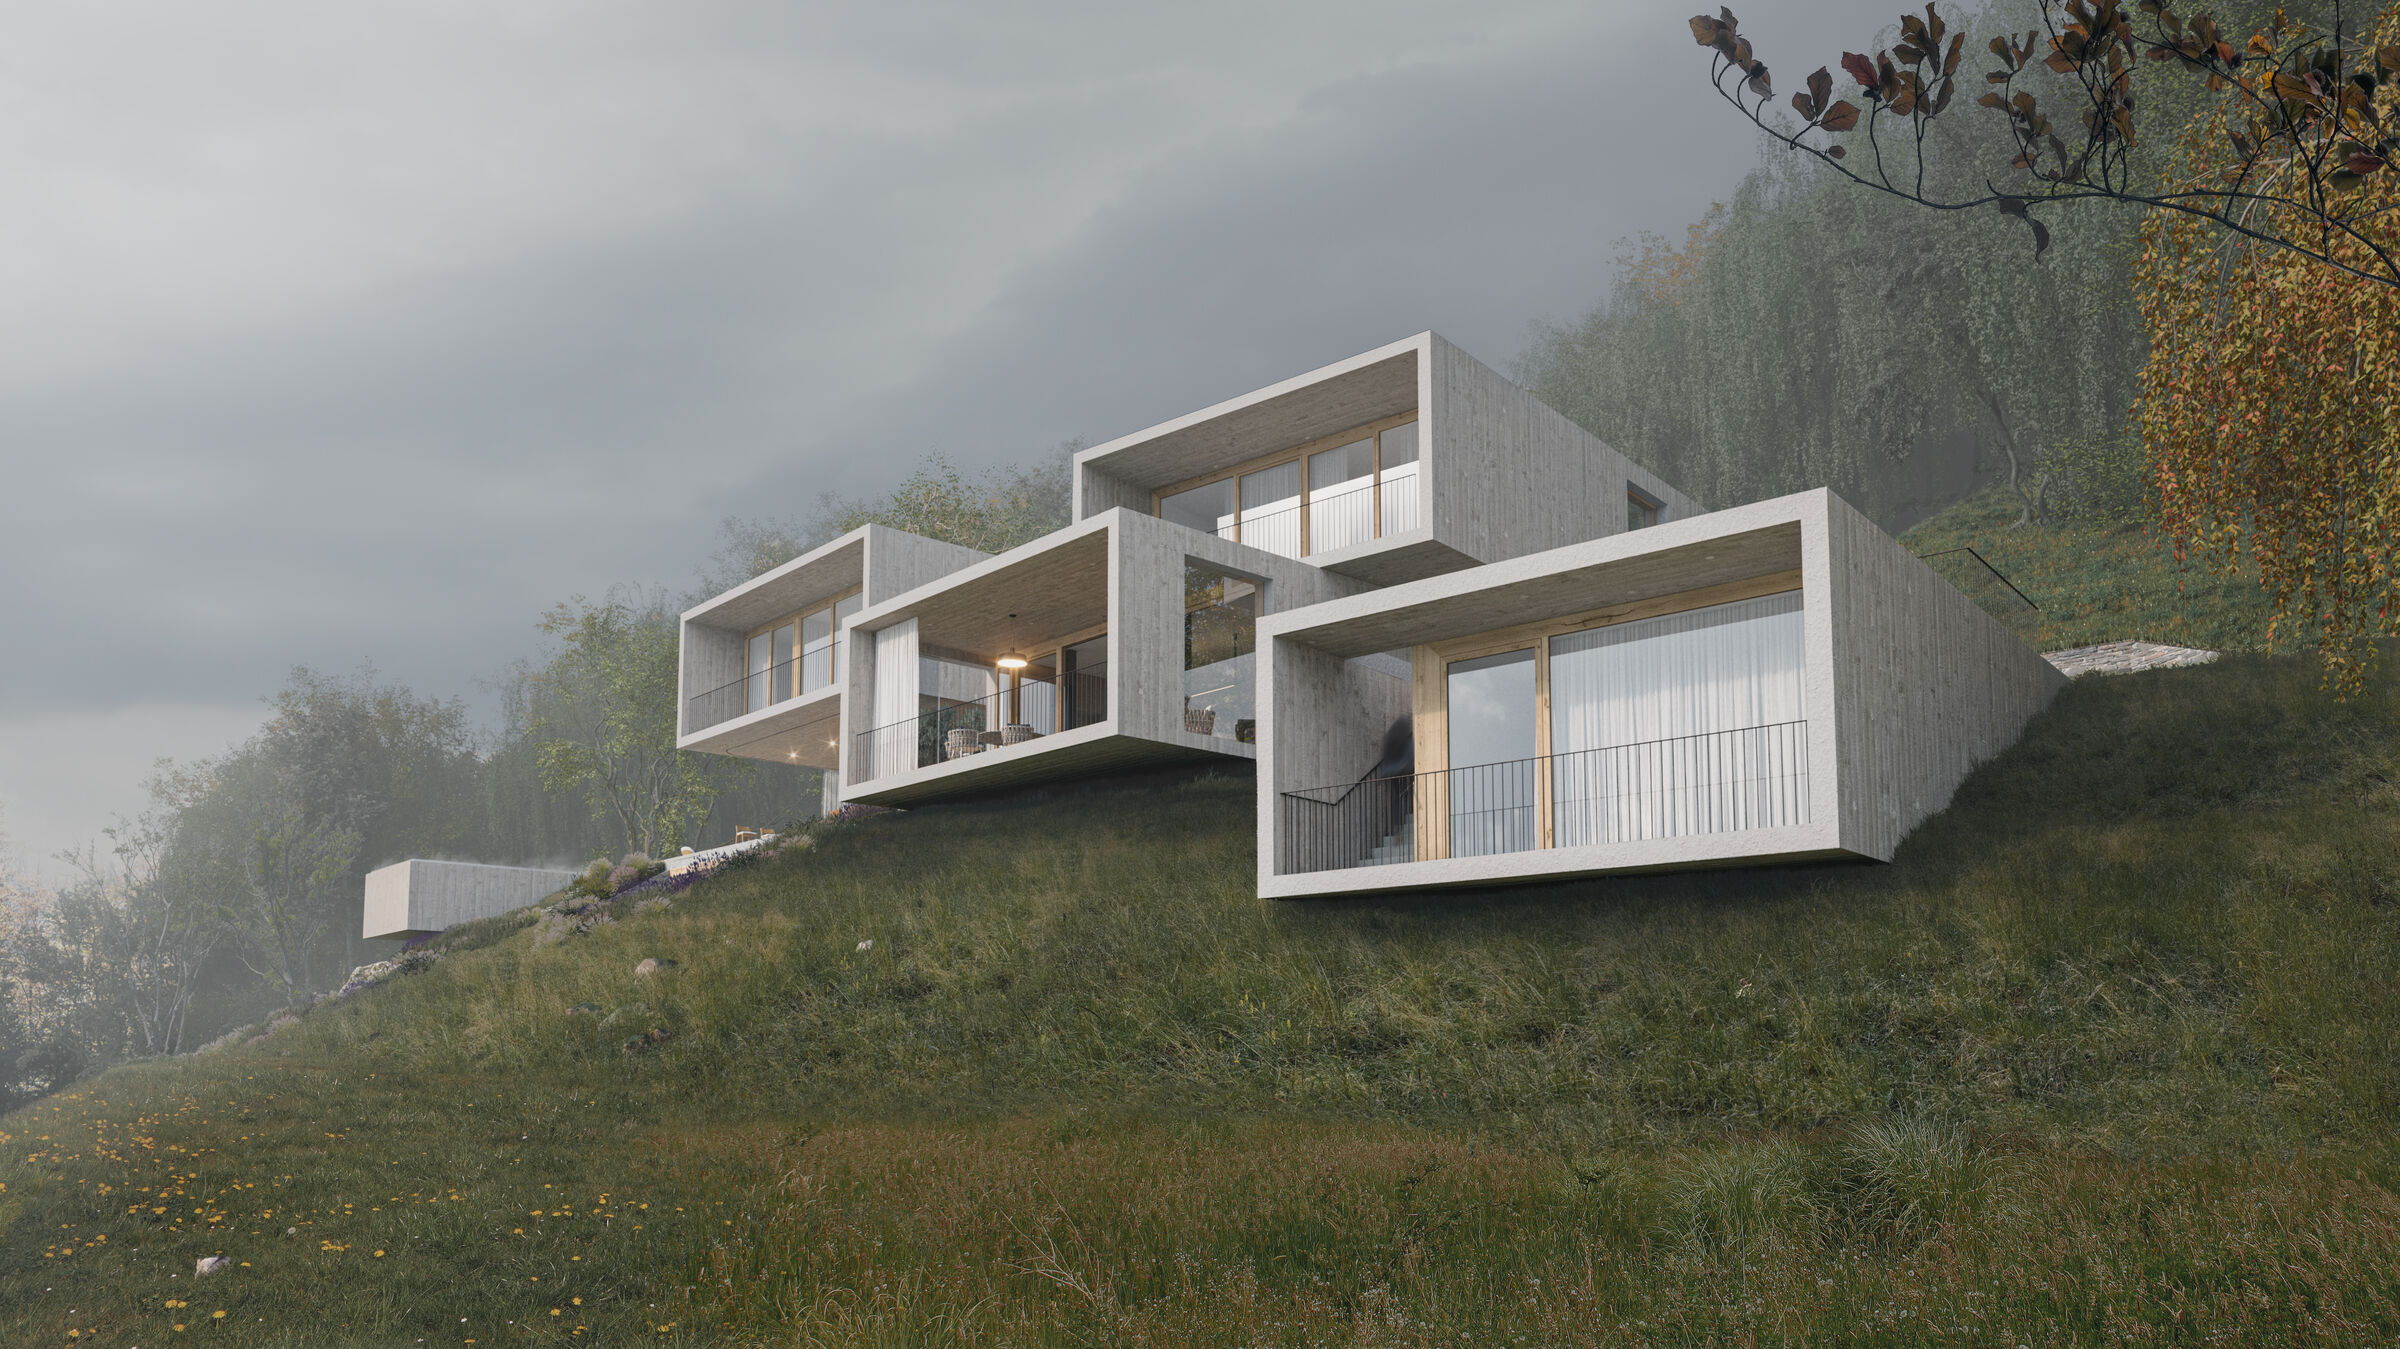 House of many houses, Innocad architecture, Unique design, Modular homes, 2400x1350 HD Desktop